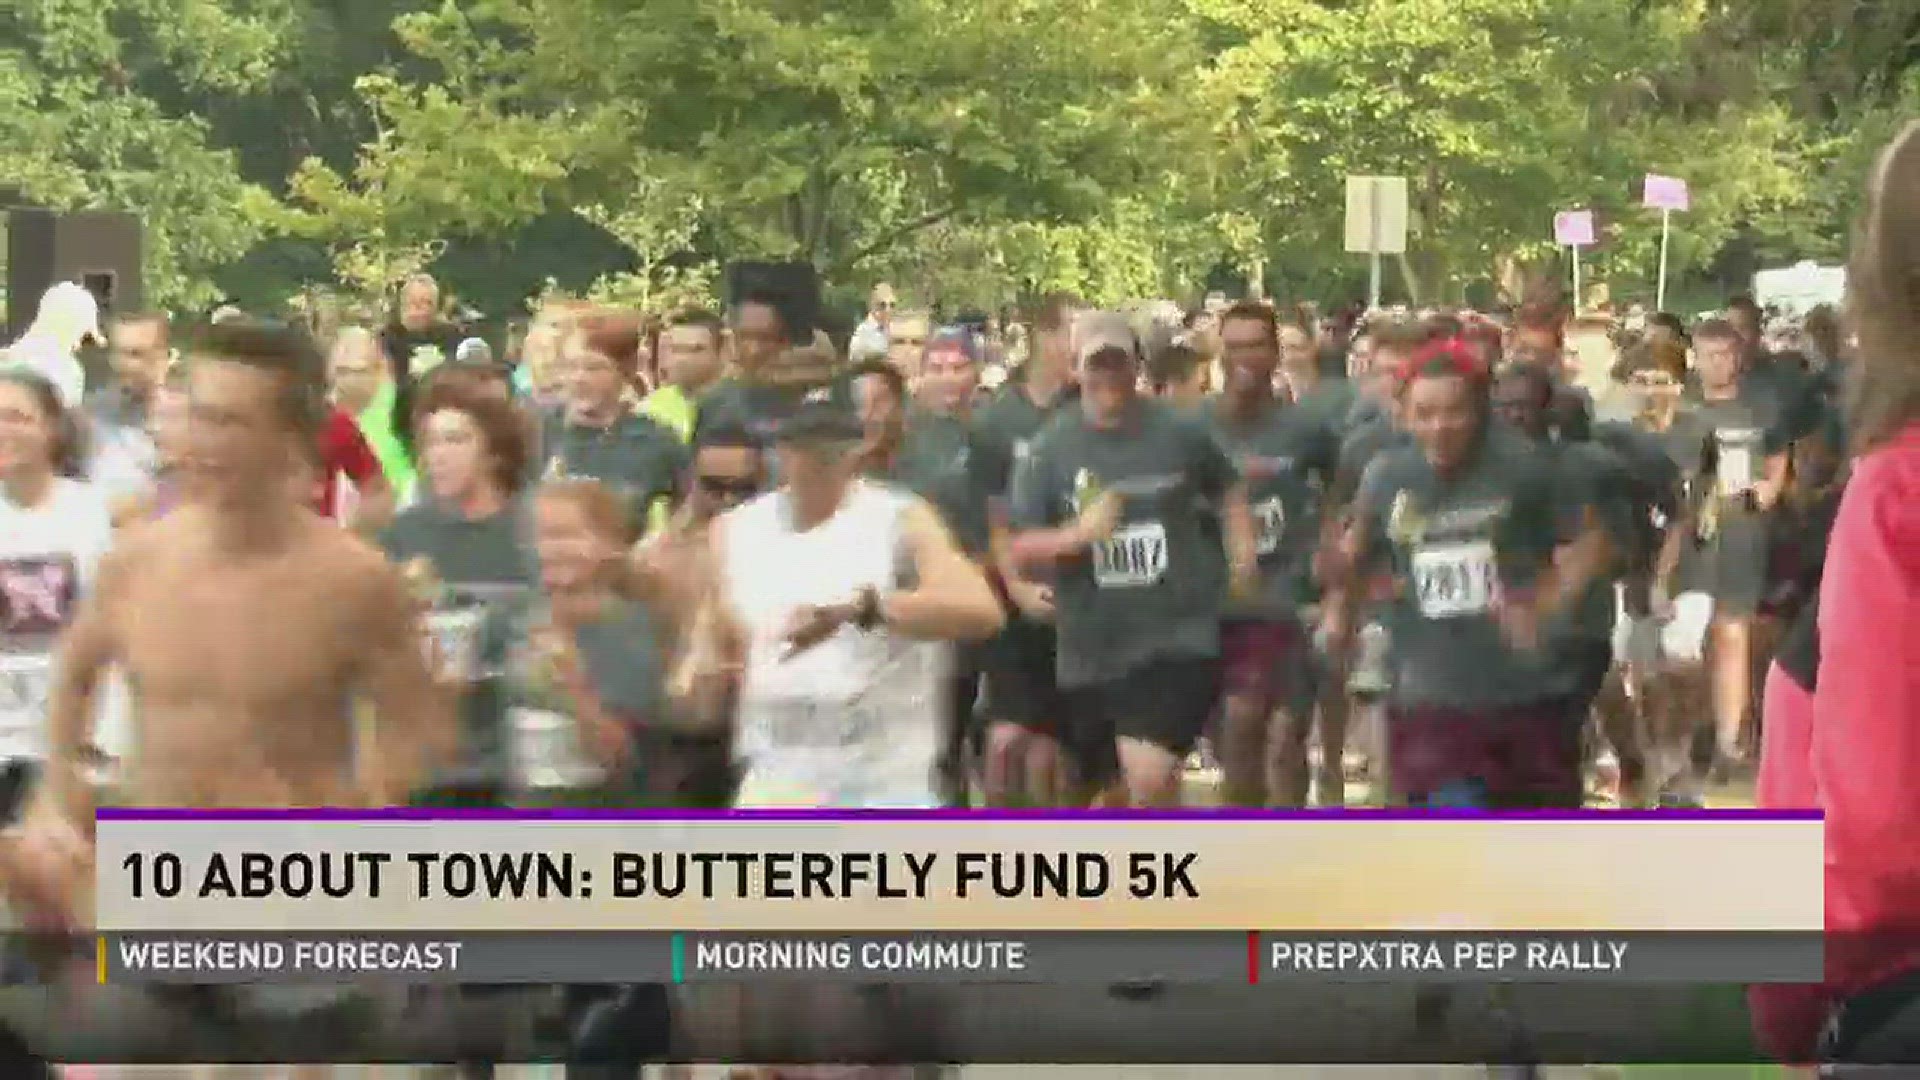 The Butterfly Fund 5K is scheduled to start at 9 a.m. Saturday.